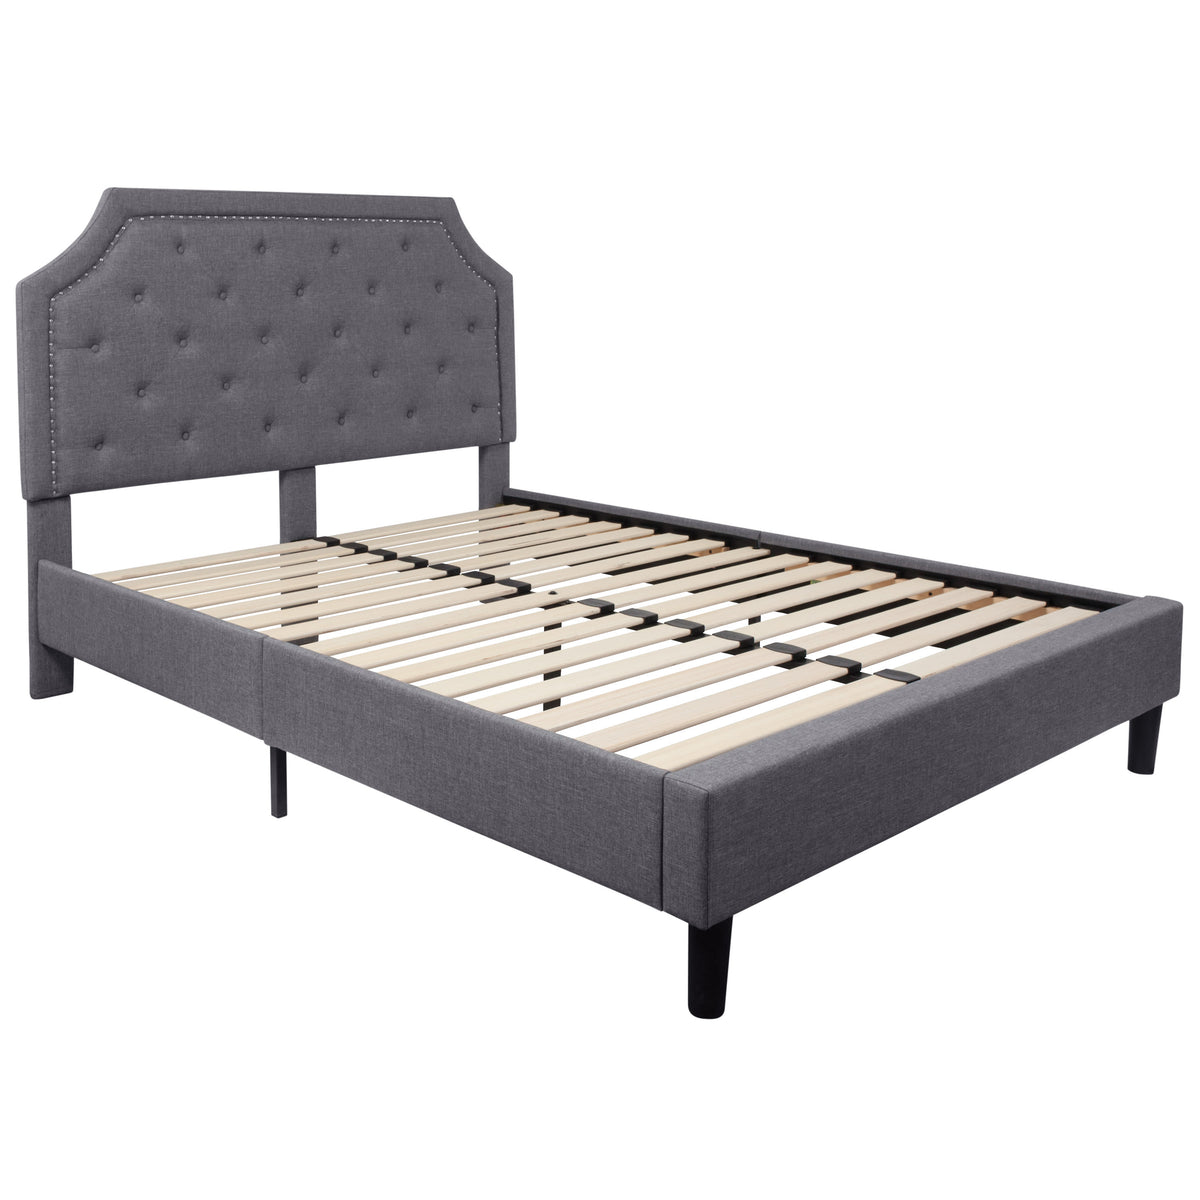 Light Gray,Queen |#| Queen Size Arched Tufted Upholstered Platform Bed in Light Gray Fabric